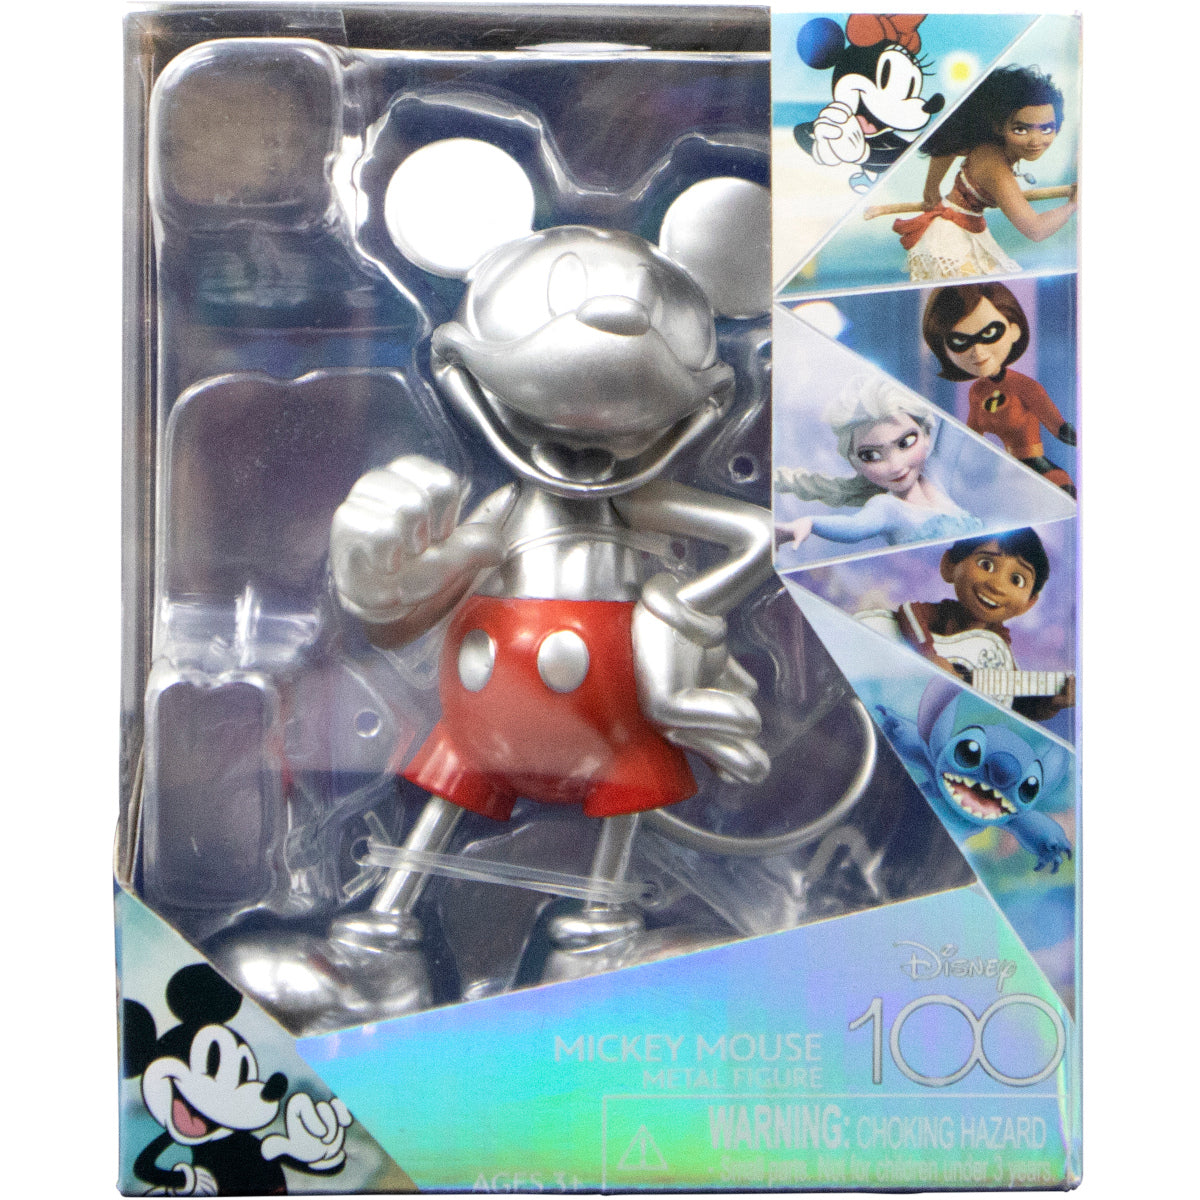 Disney 100 Diecast Collectible Figures 10cm Mickey Mouse